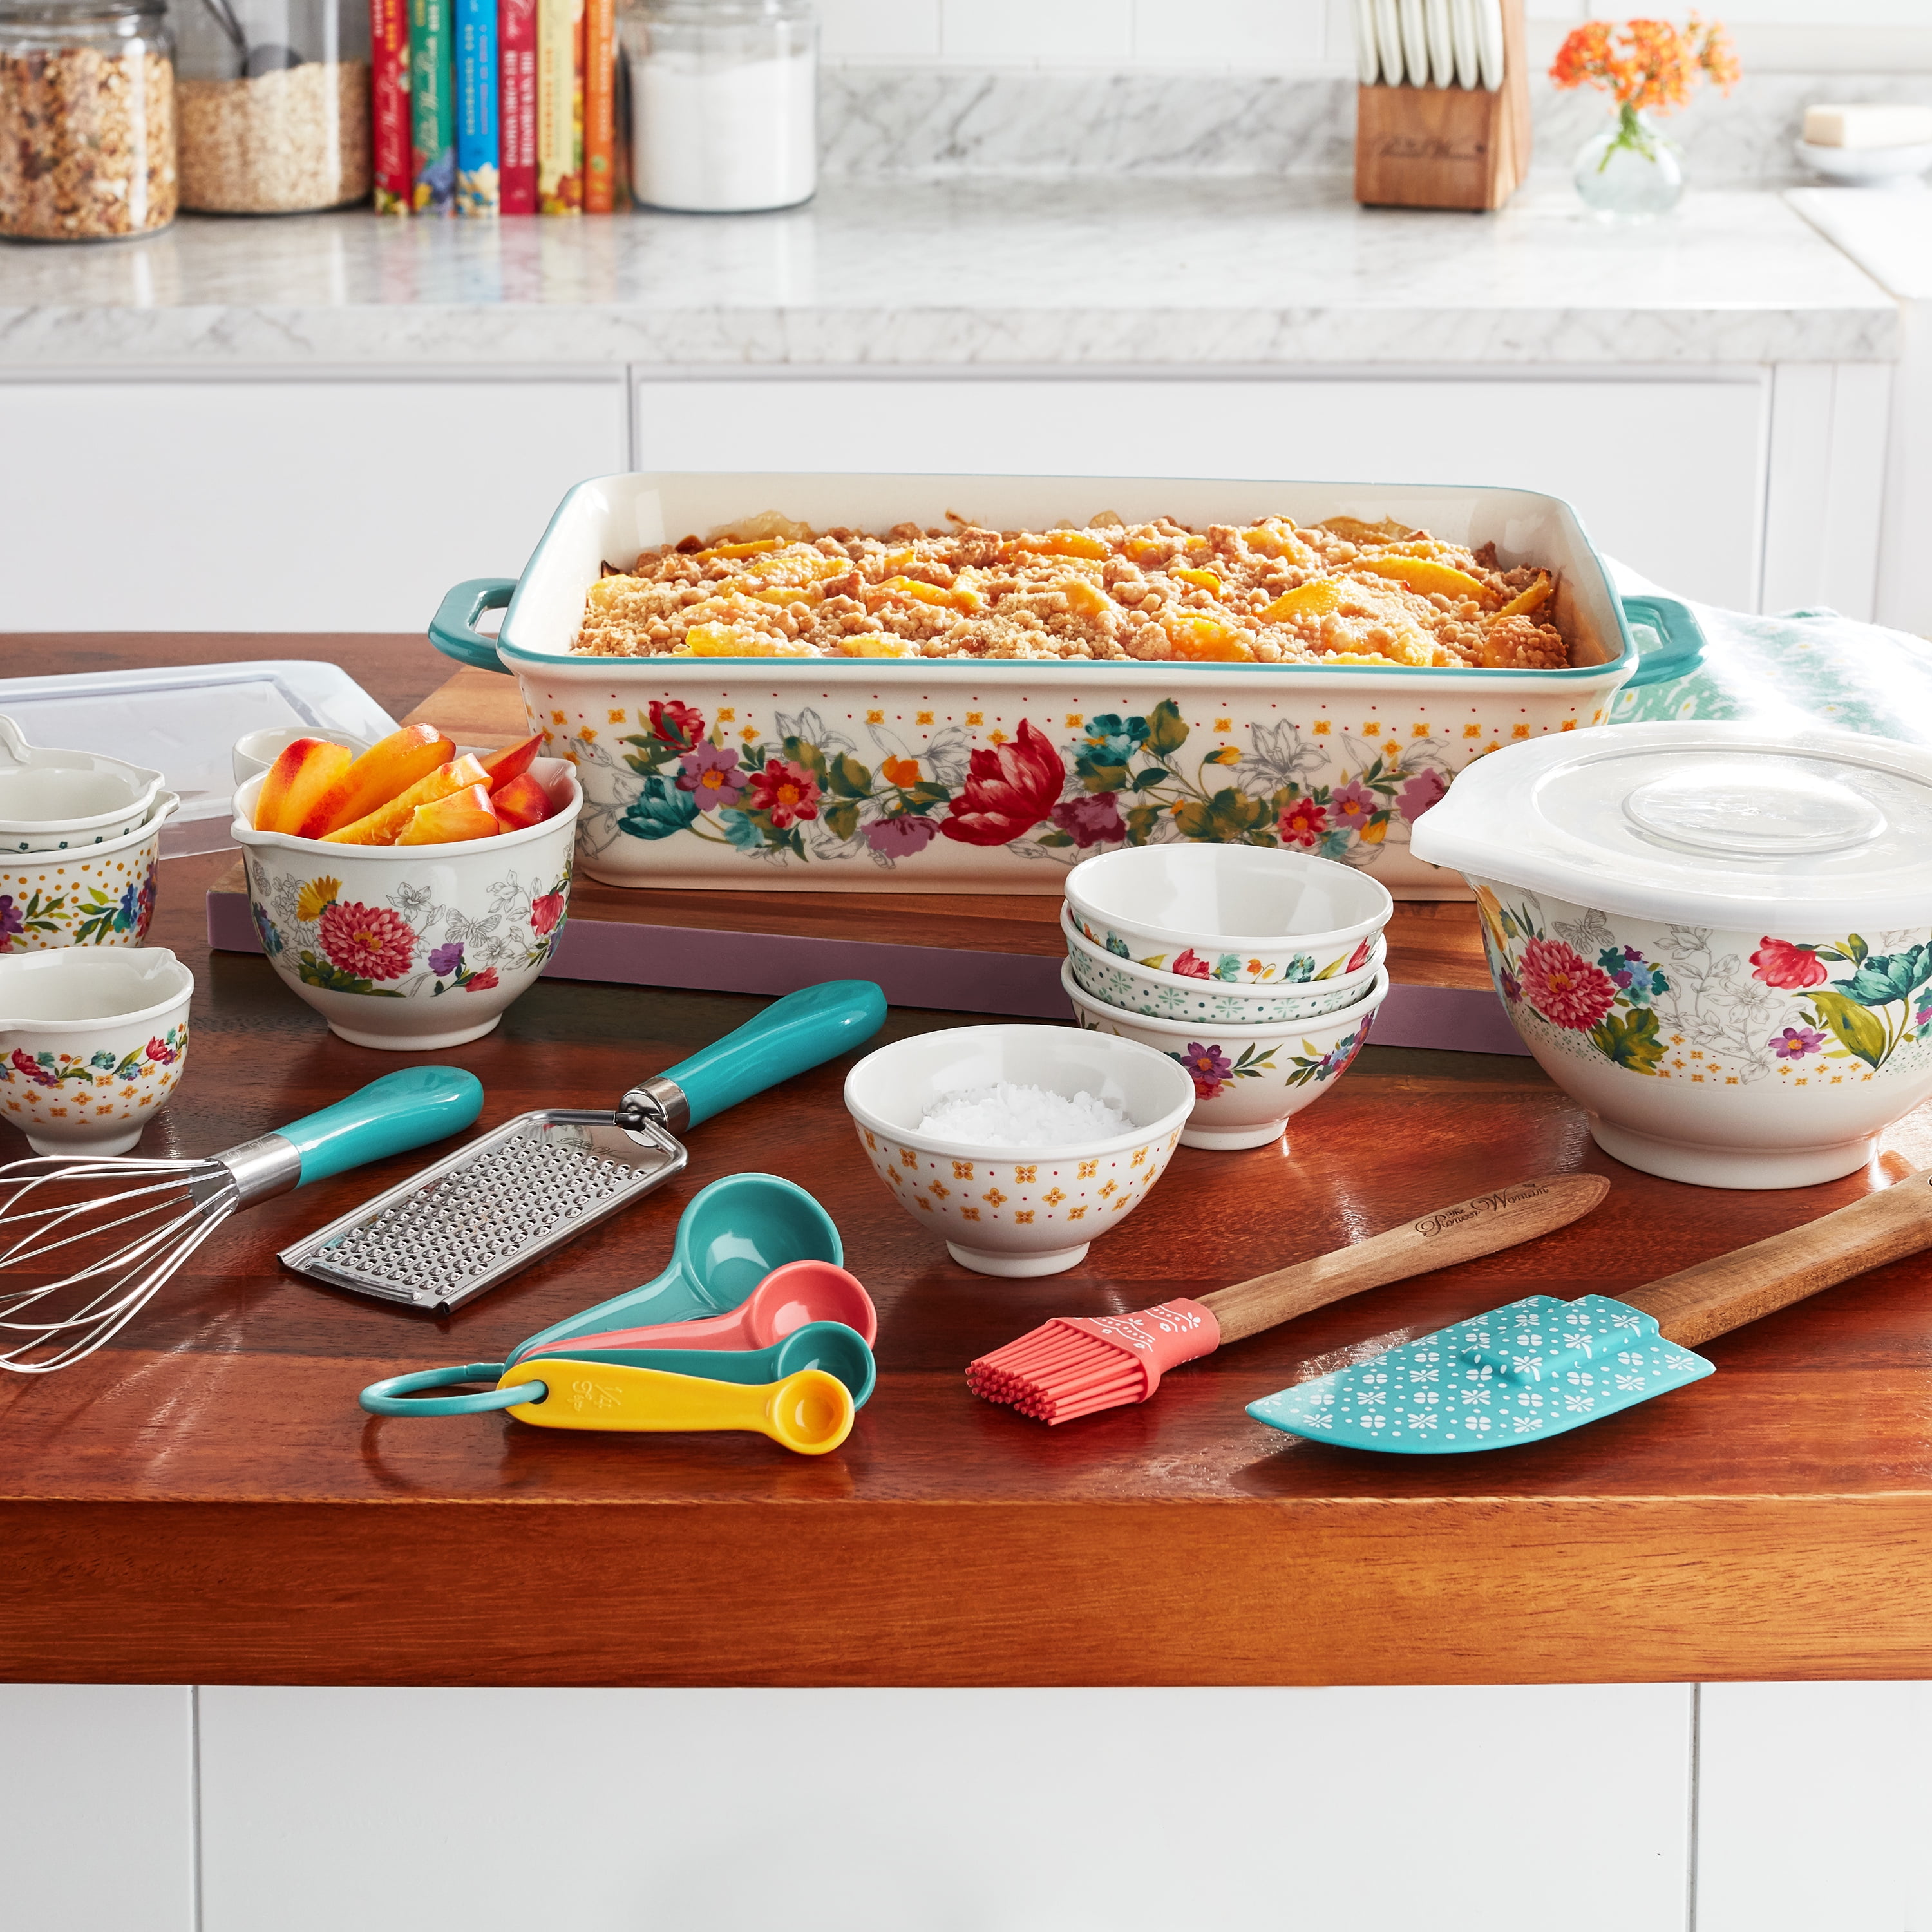 Bake just like The Pioneer Woman with this 10-piece set that's now